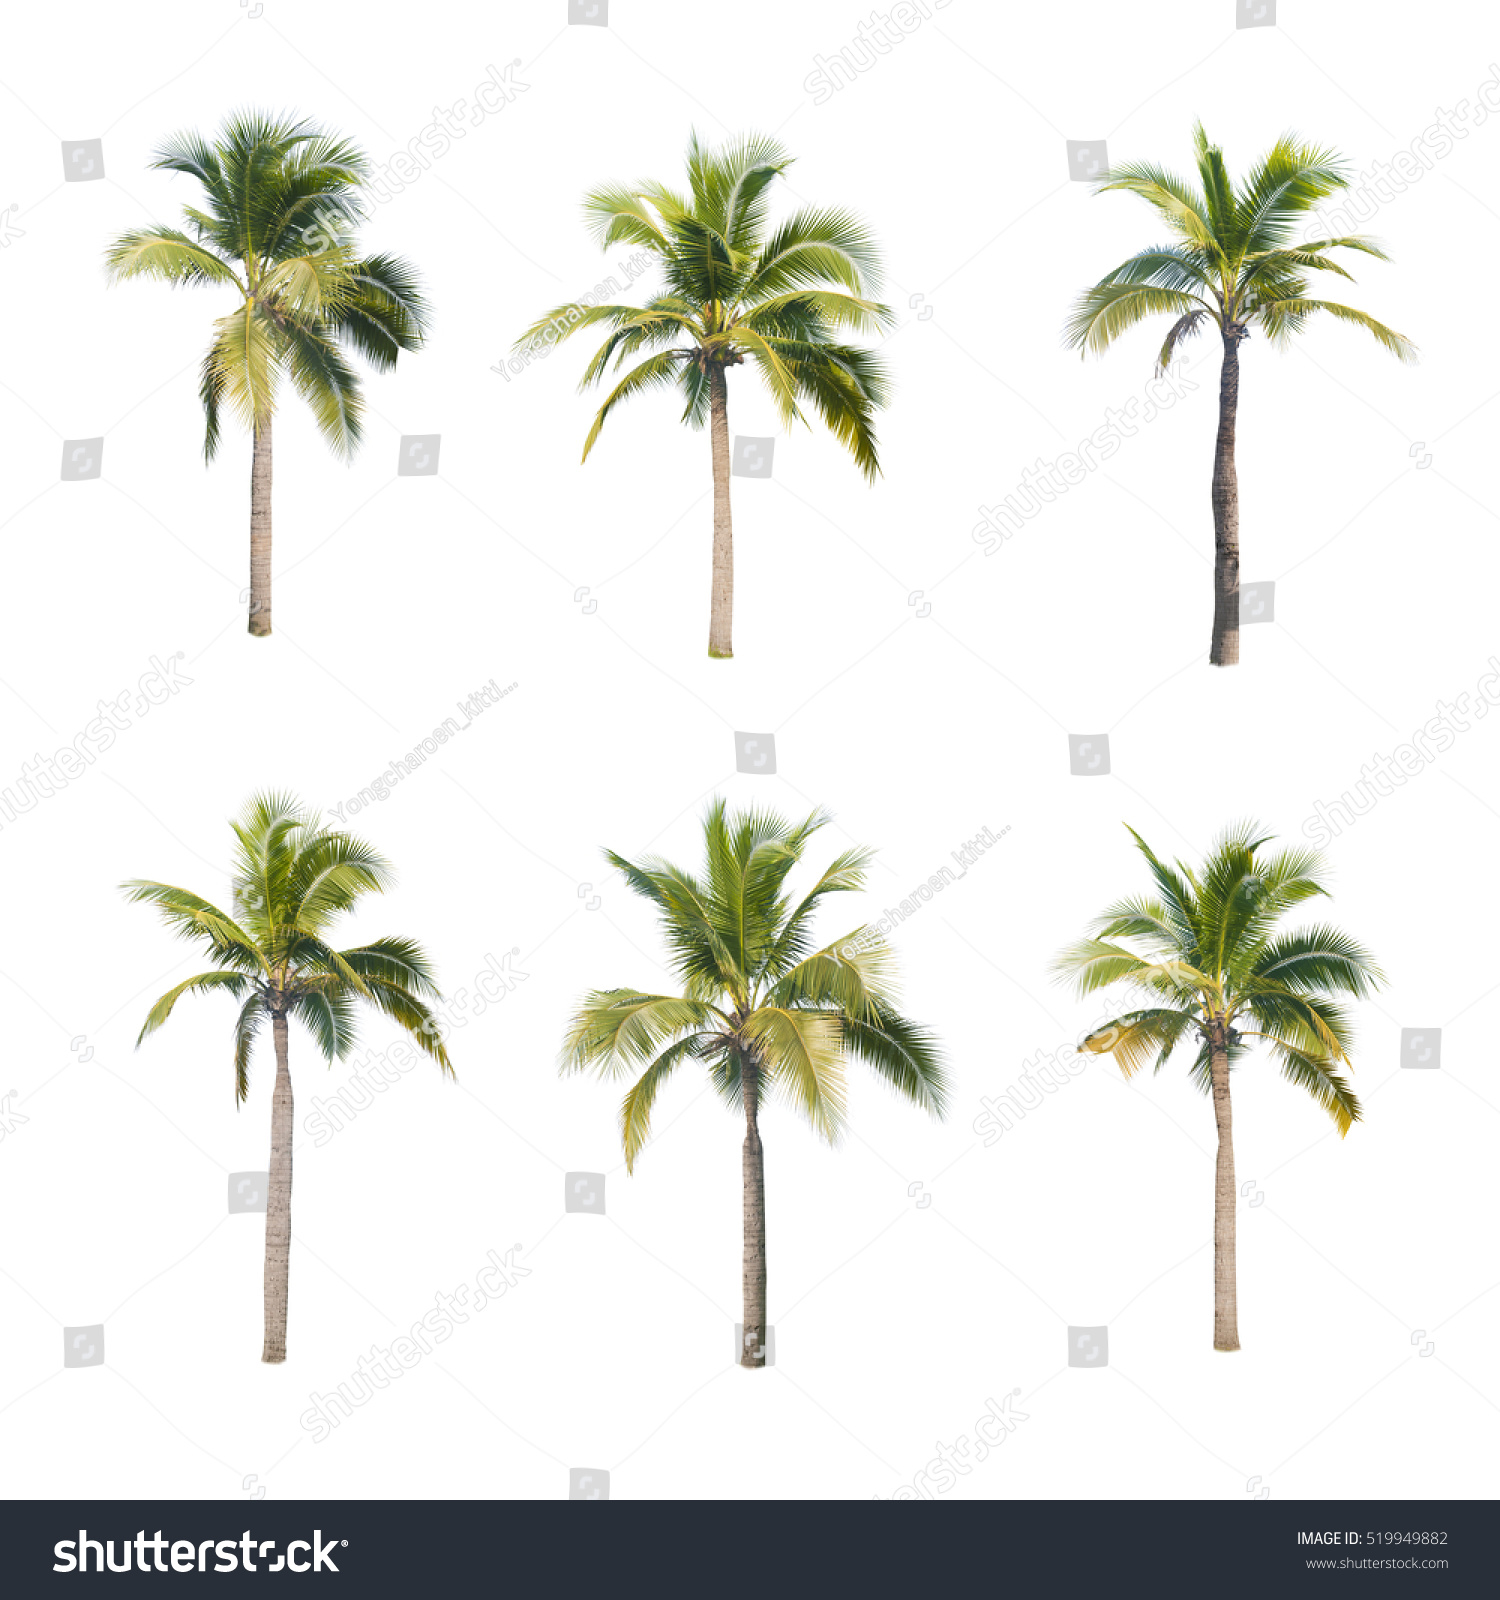 Coconut Trees On White Background Stock Photo 519949882 | Shutterstock